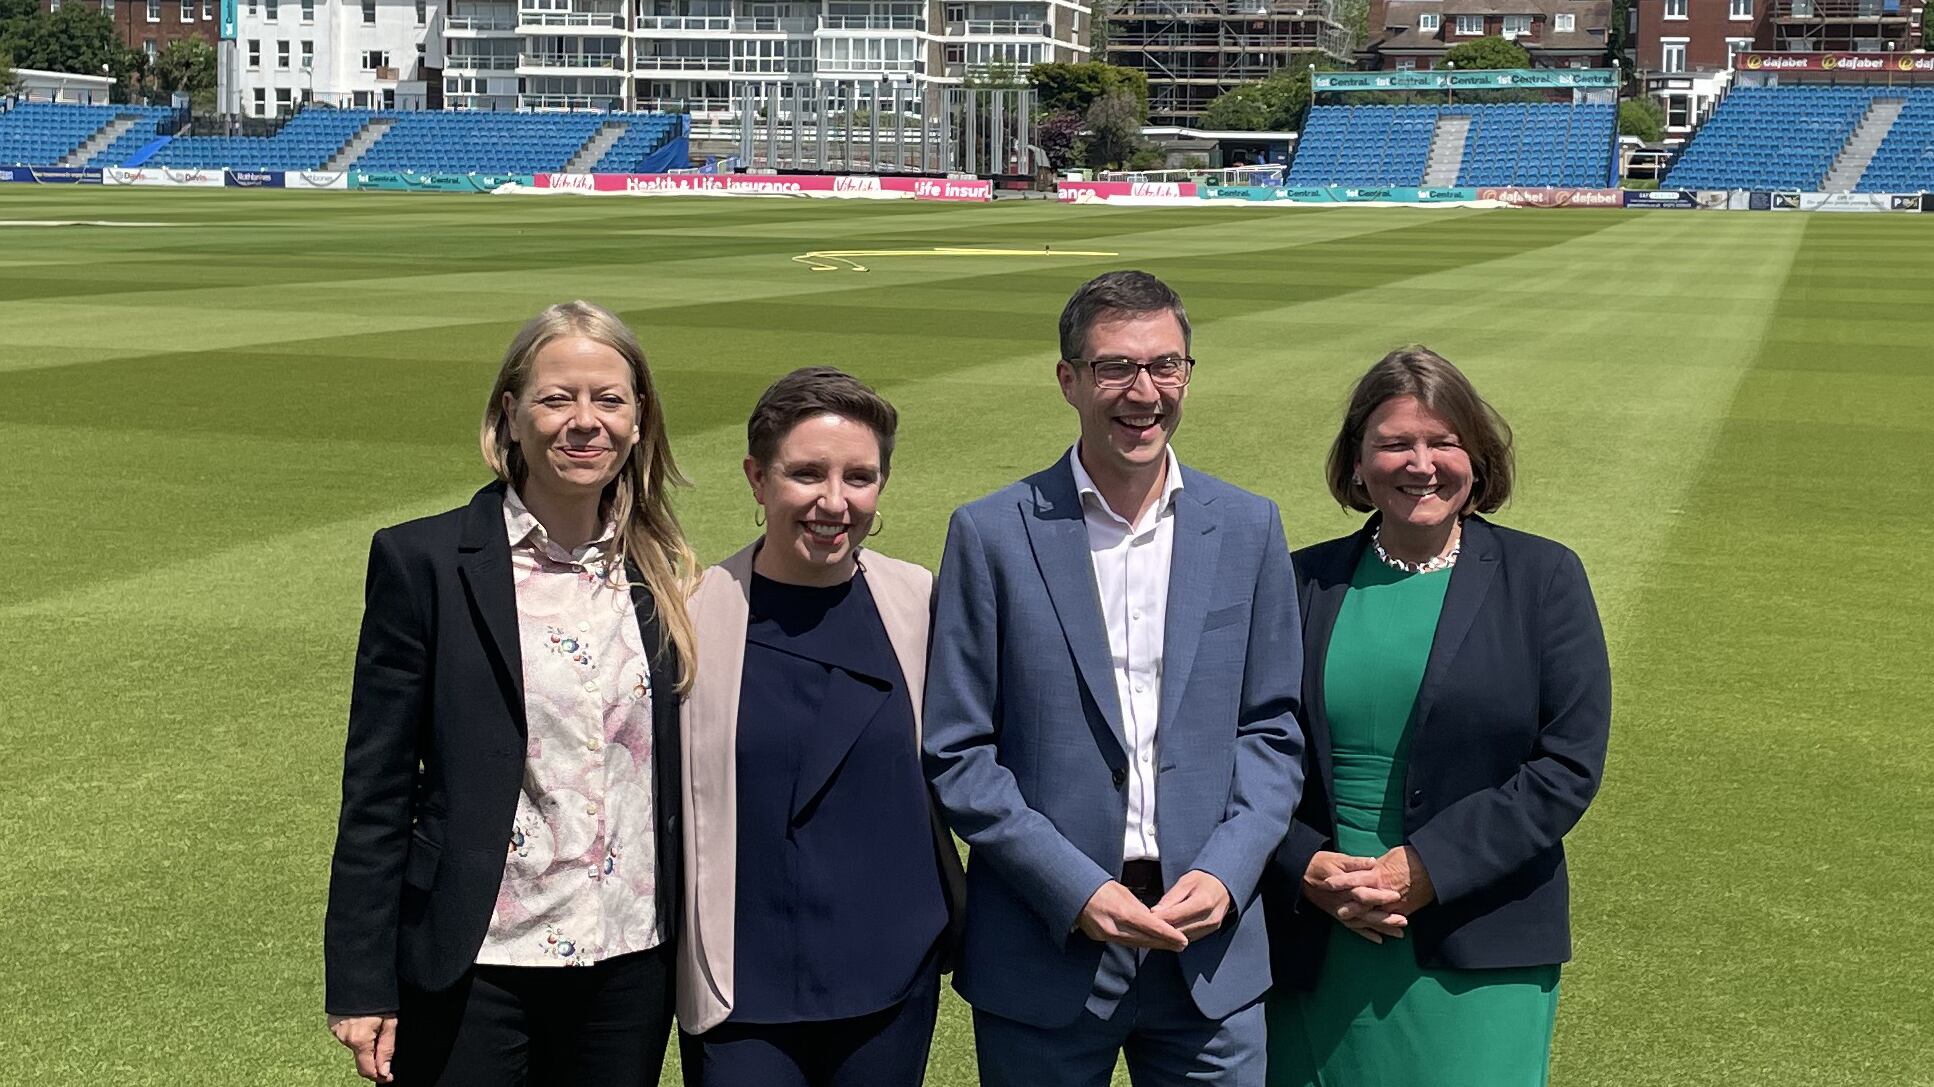 Green Party co-leaders Carla Denyer (2nd left) and Adrian Ramsay, with candidates Sian Berry (left) and Ellie Chowns (right) during the Green Party’s manifesto launch at the Sussex County Cricket grounds in Hove